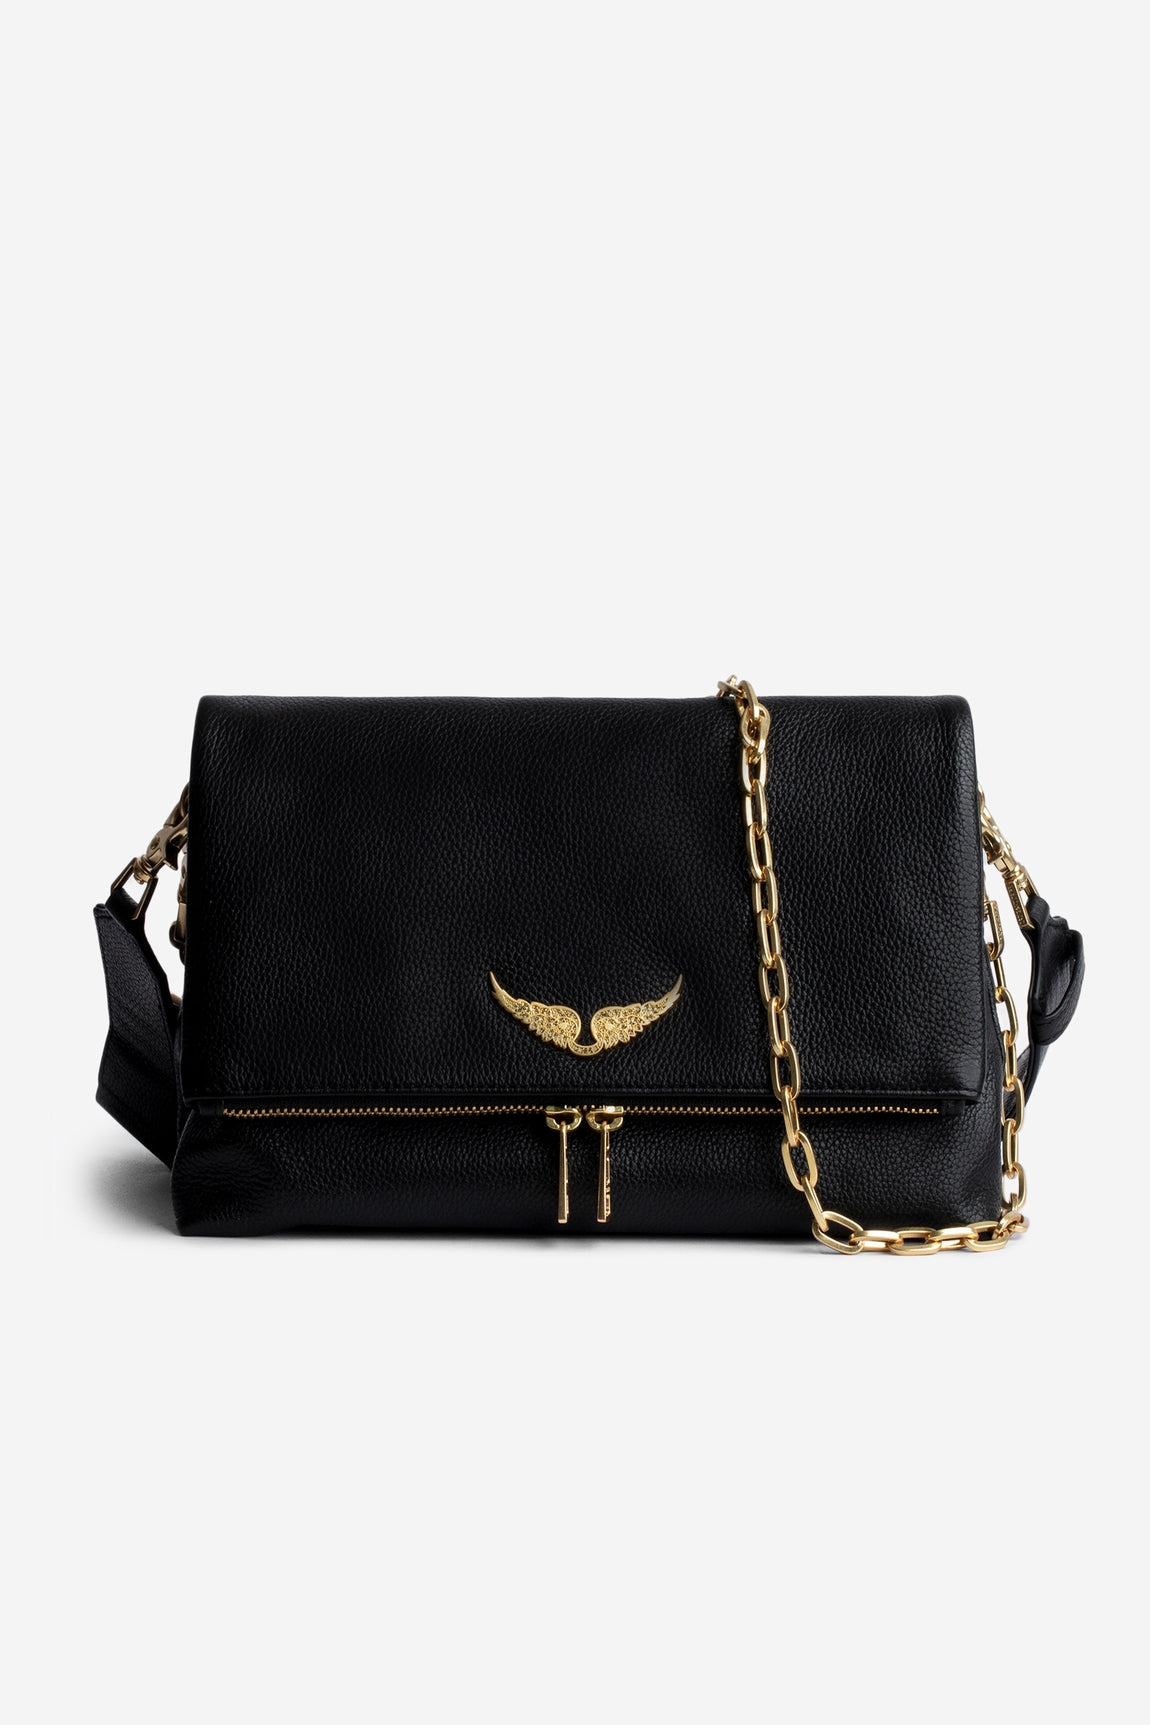 ROCKY GRAINED LEATHER bag, black-gold